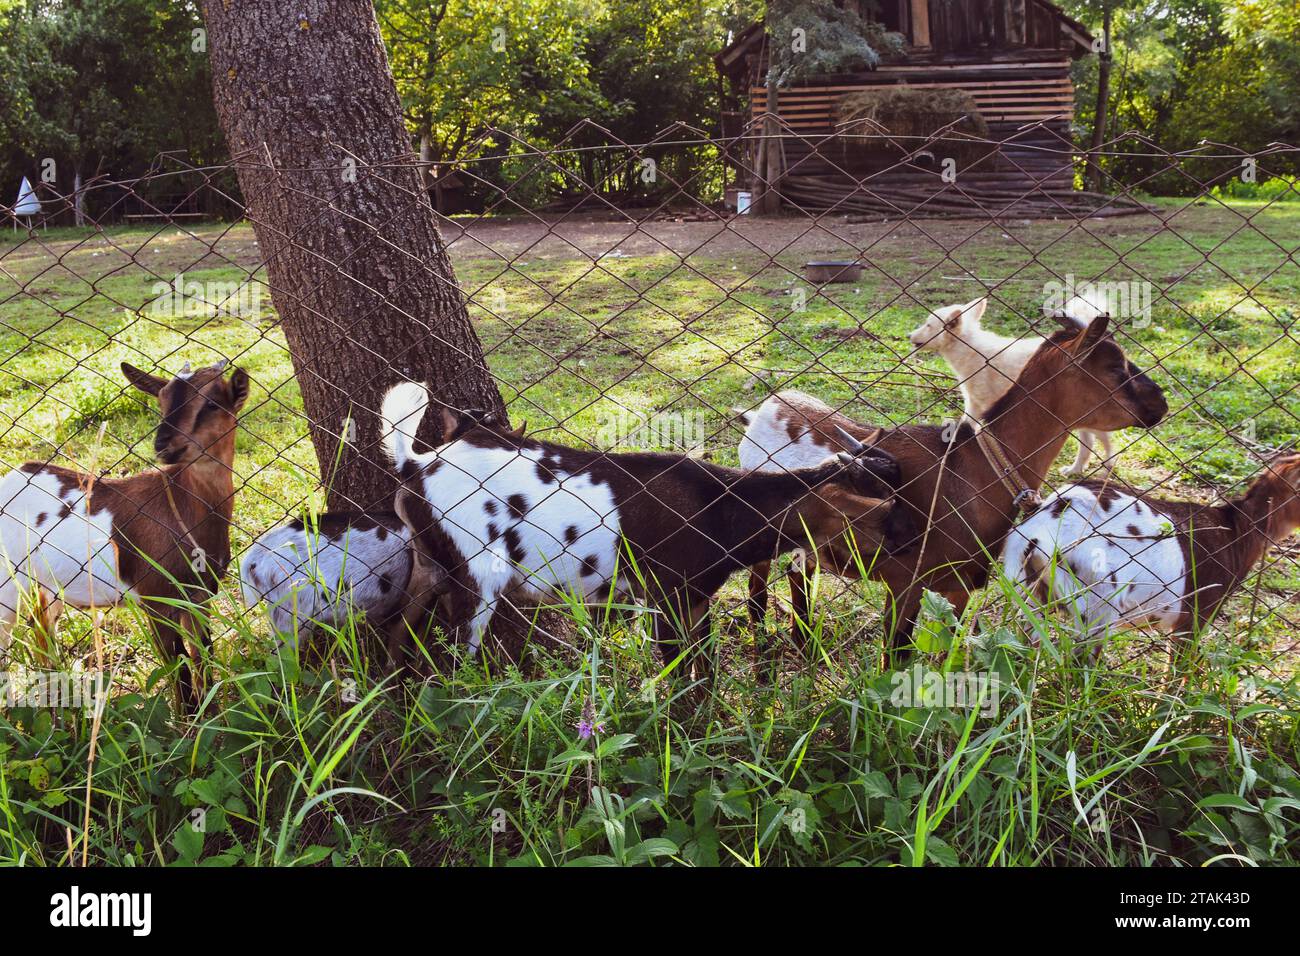 Five goats and a dog on a wire-fenced farm. The dog guards the goats. Peaceful animals on a rural farm Stock Photo